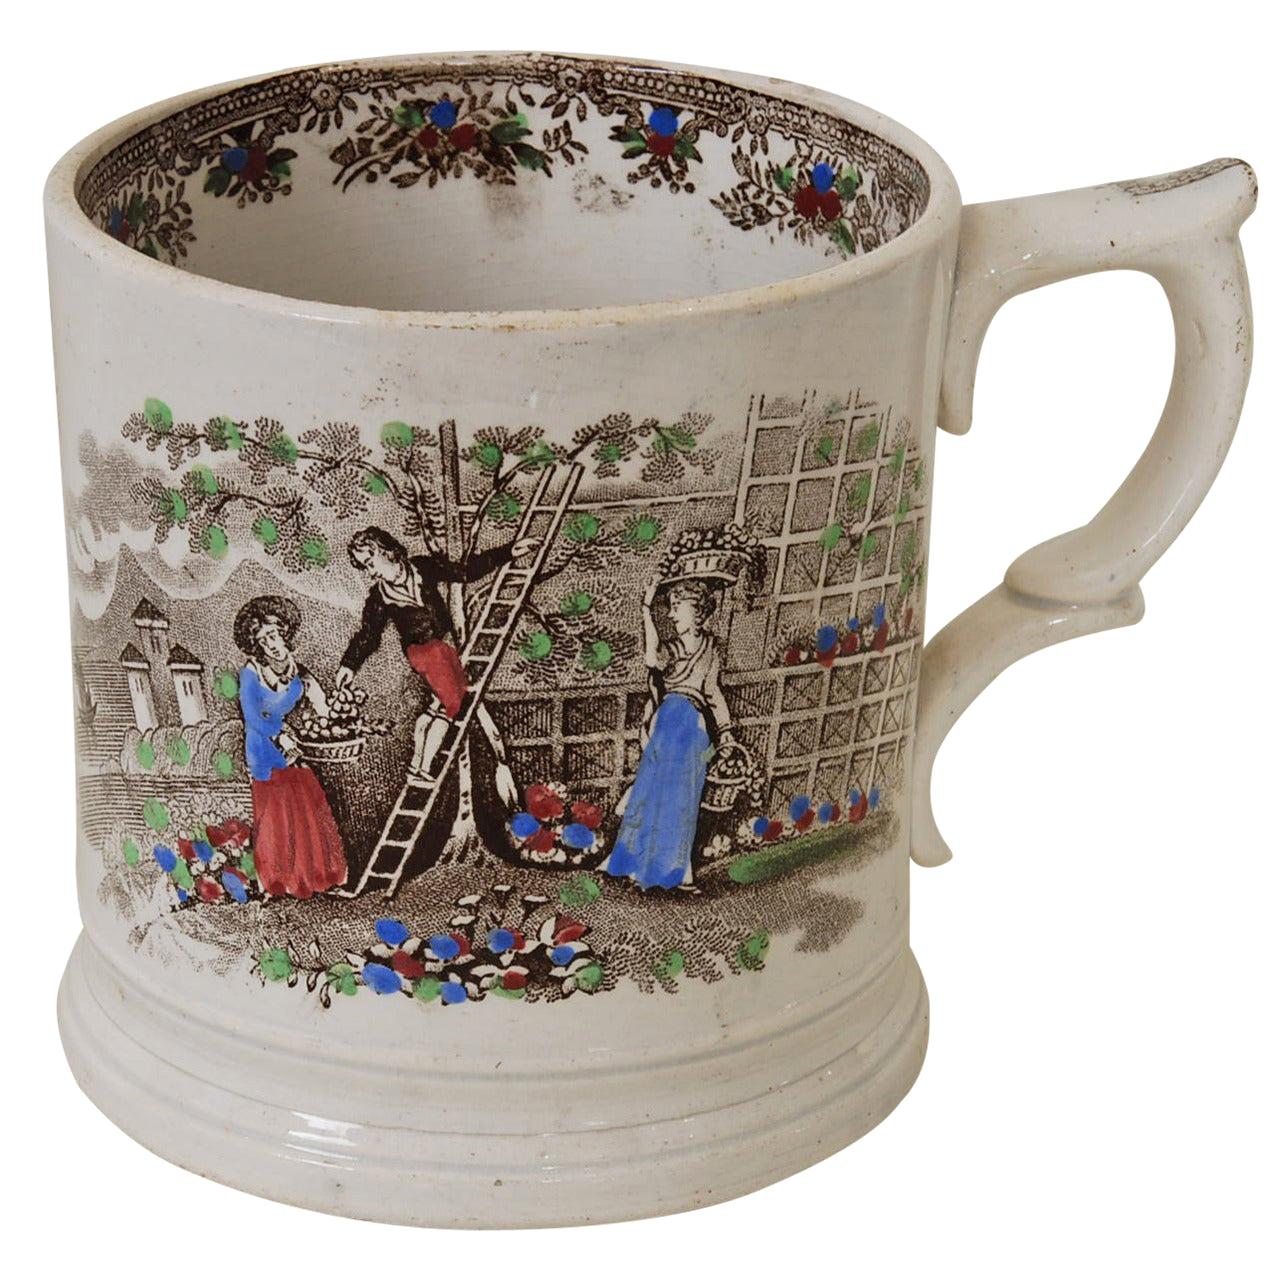 English Staffordshire Frog Mug with Hand Colored Garden Scenes, 19th Century